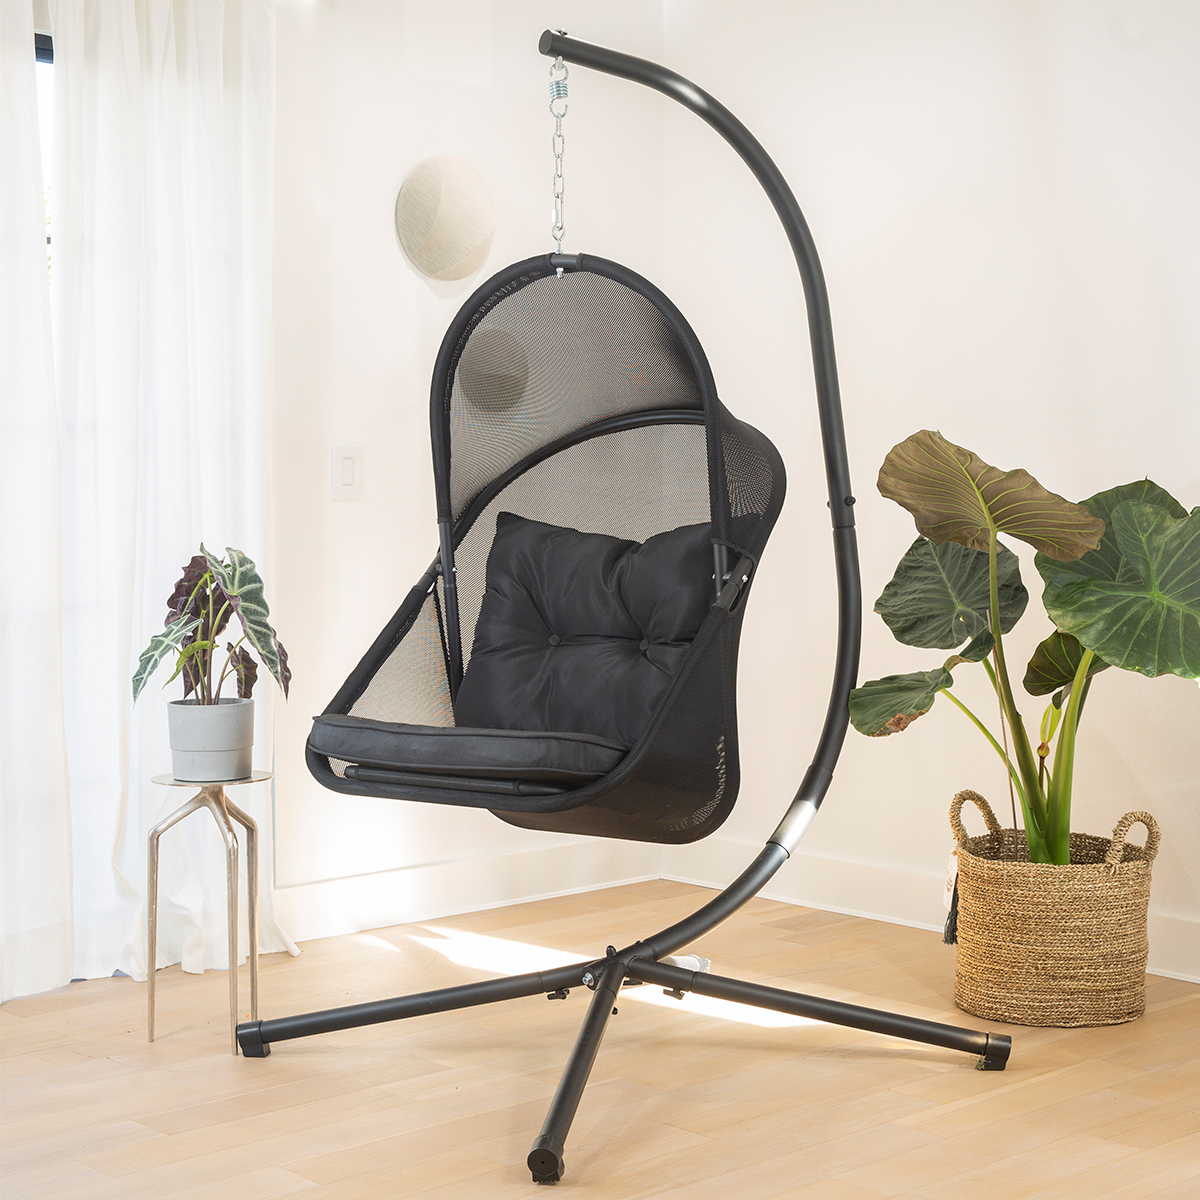 Patio Hanging Egg Chair W/ Canopy Chair with Cushion Basket Lounge Seat Collapsible Chair Seat, Black - image 2 of 7